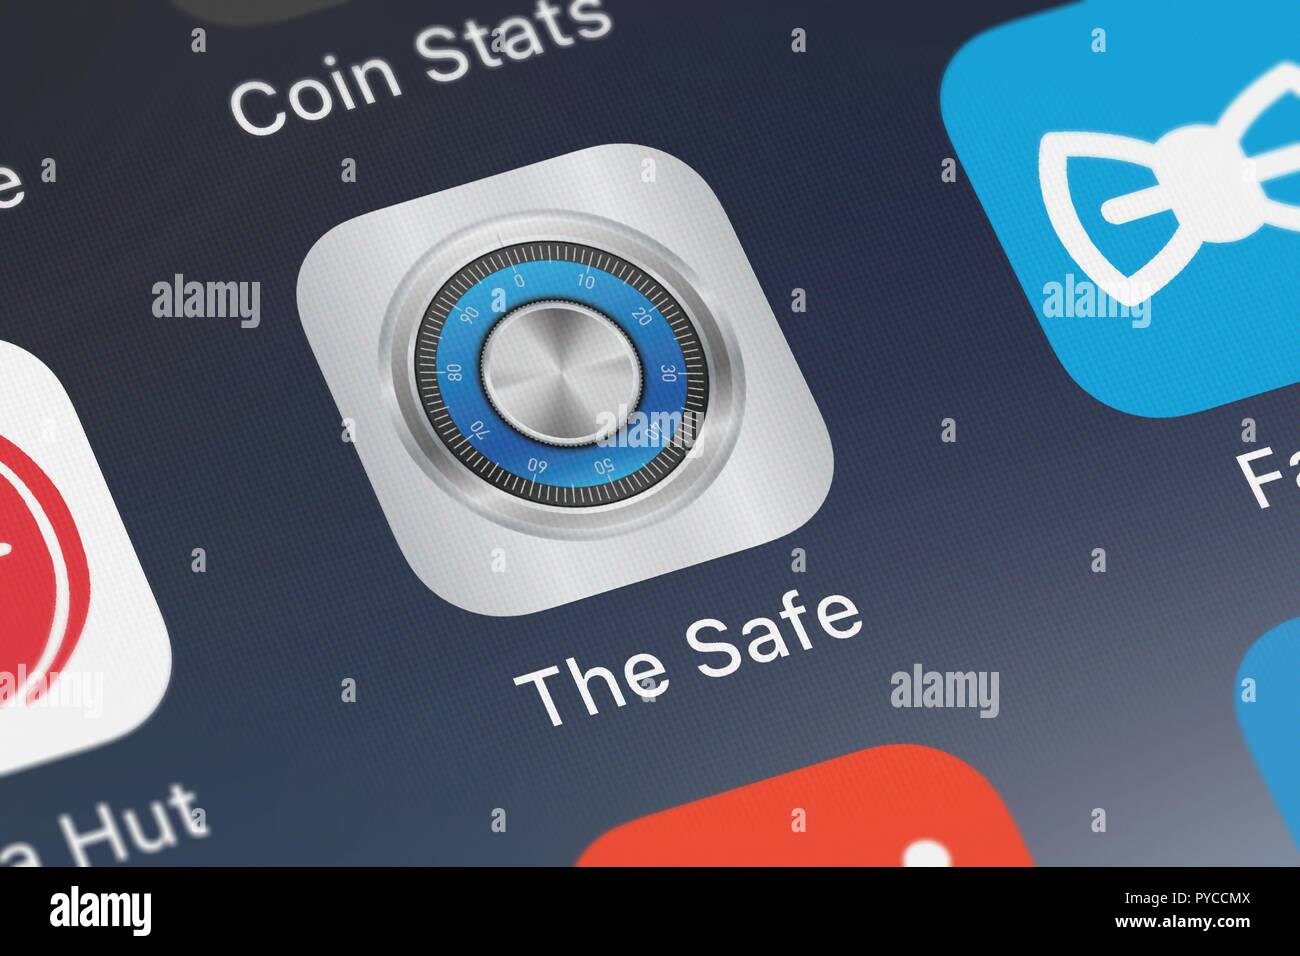 London, United Kingdom - October 26, 2018: Close-up shot of the The Safe - Can you crack the safe Are you up to the challenge application icon from Sm Stock Photo